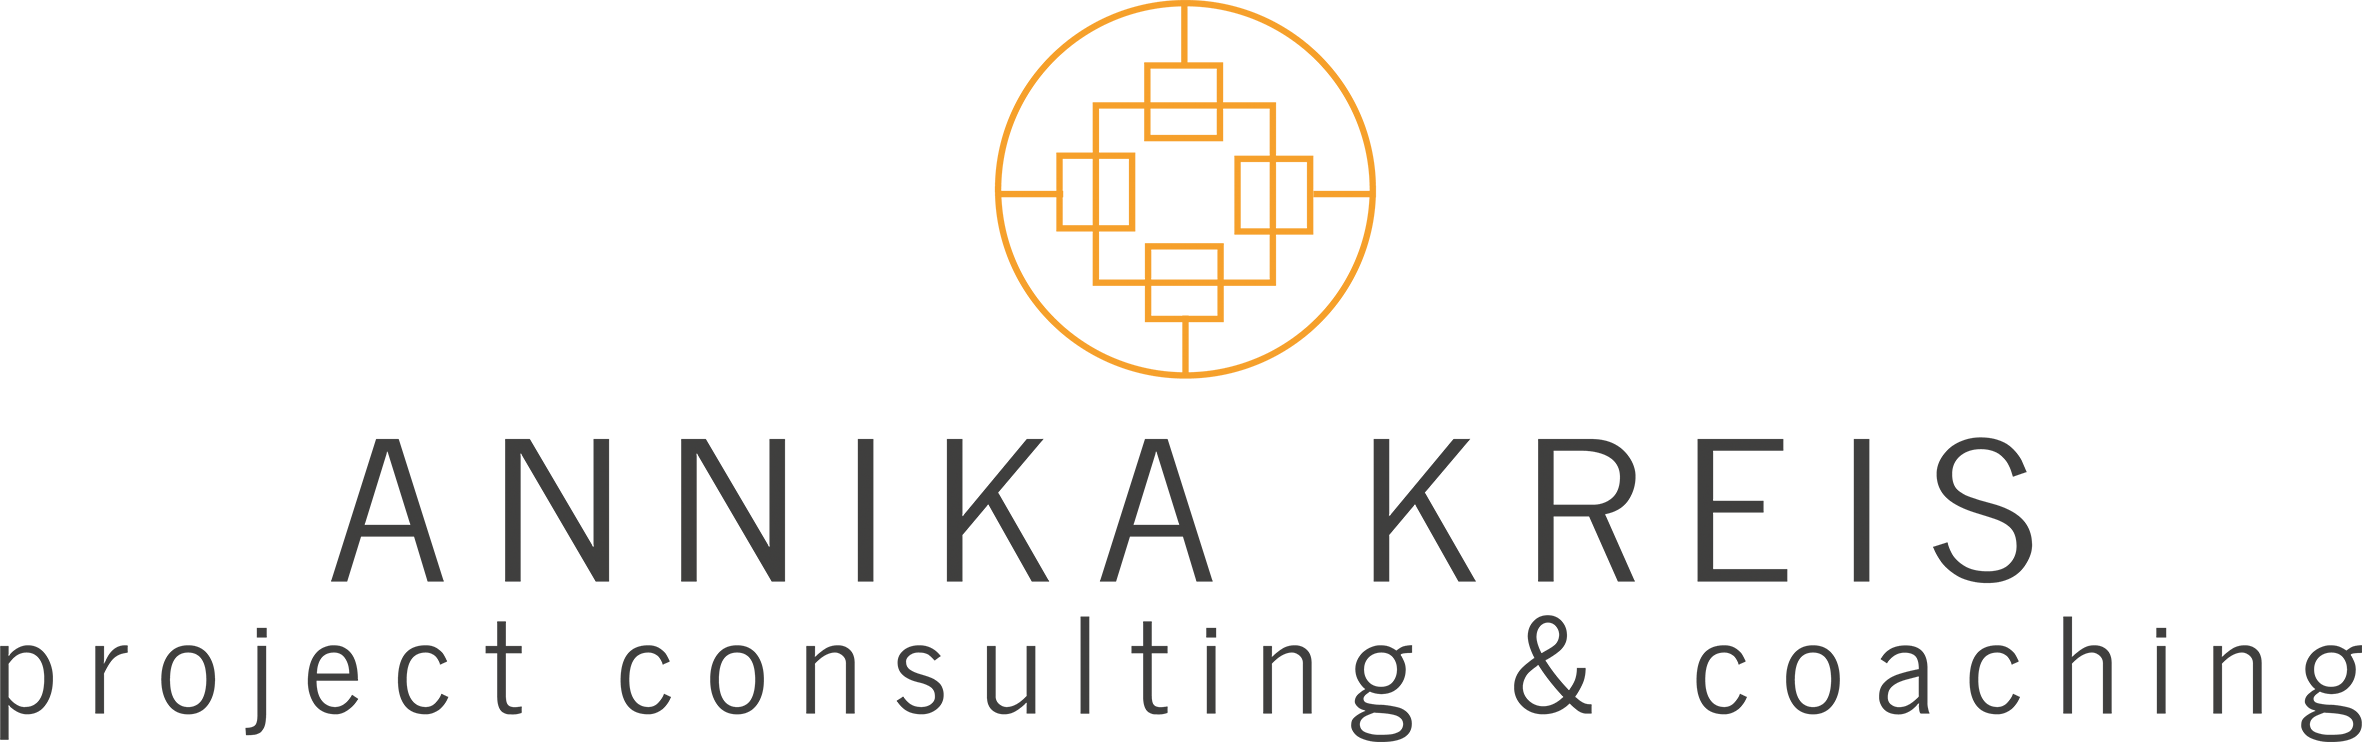 Annika Kreis - Project Consulting & Coaching